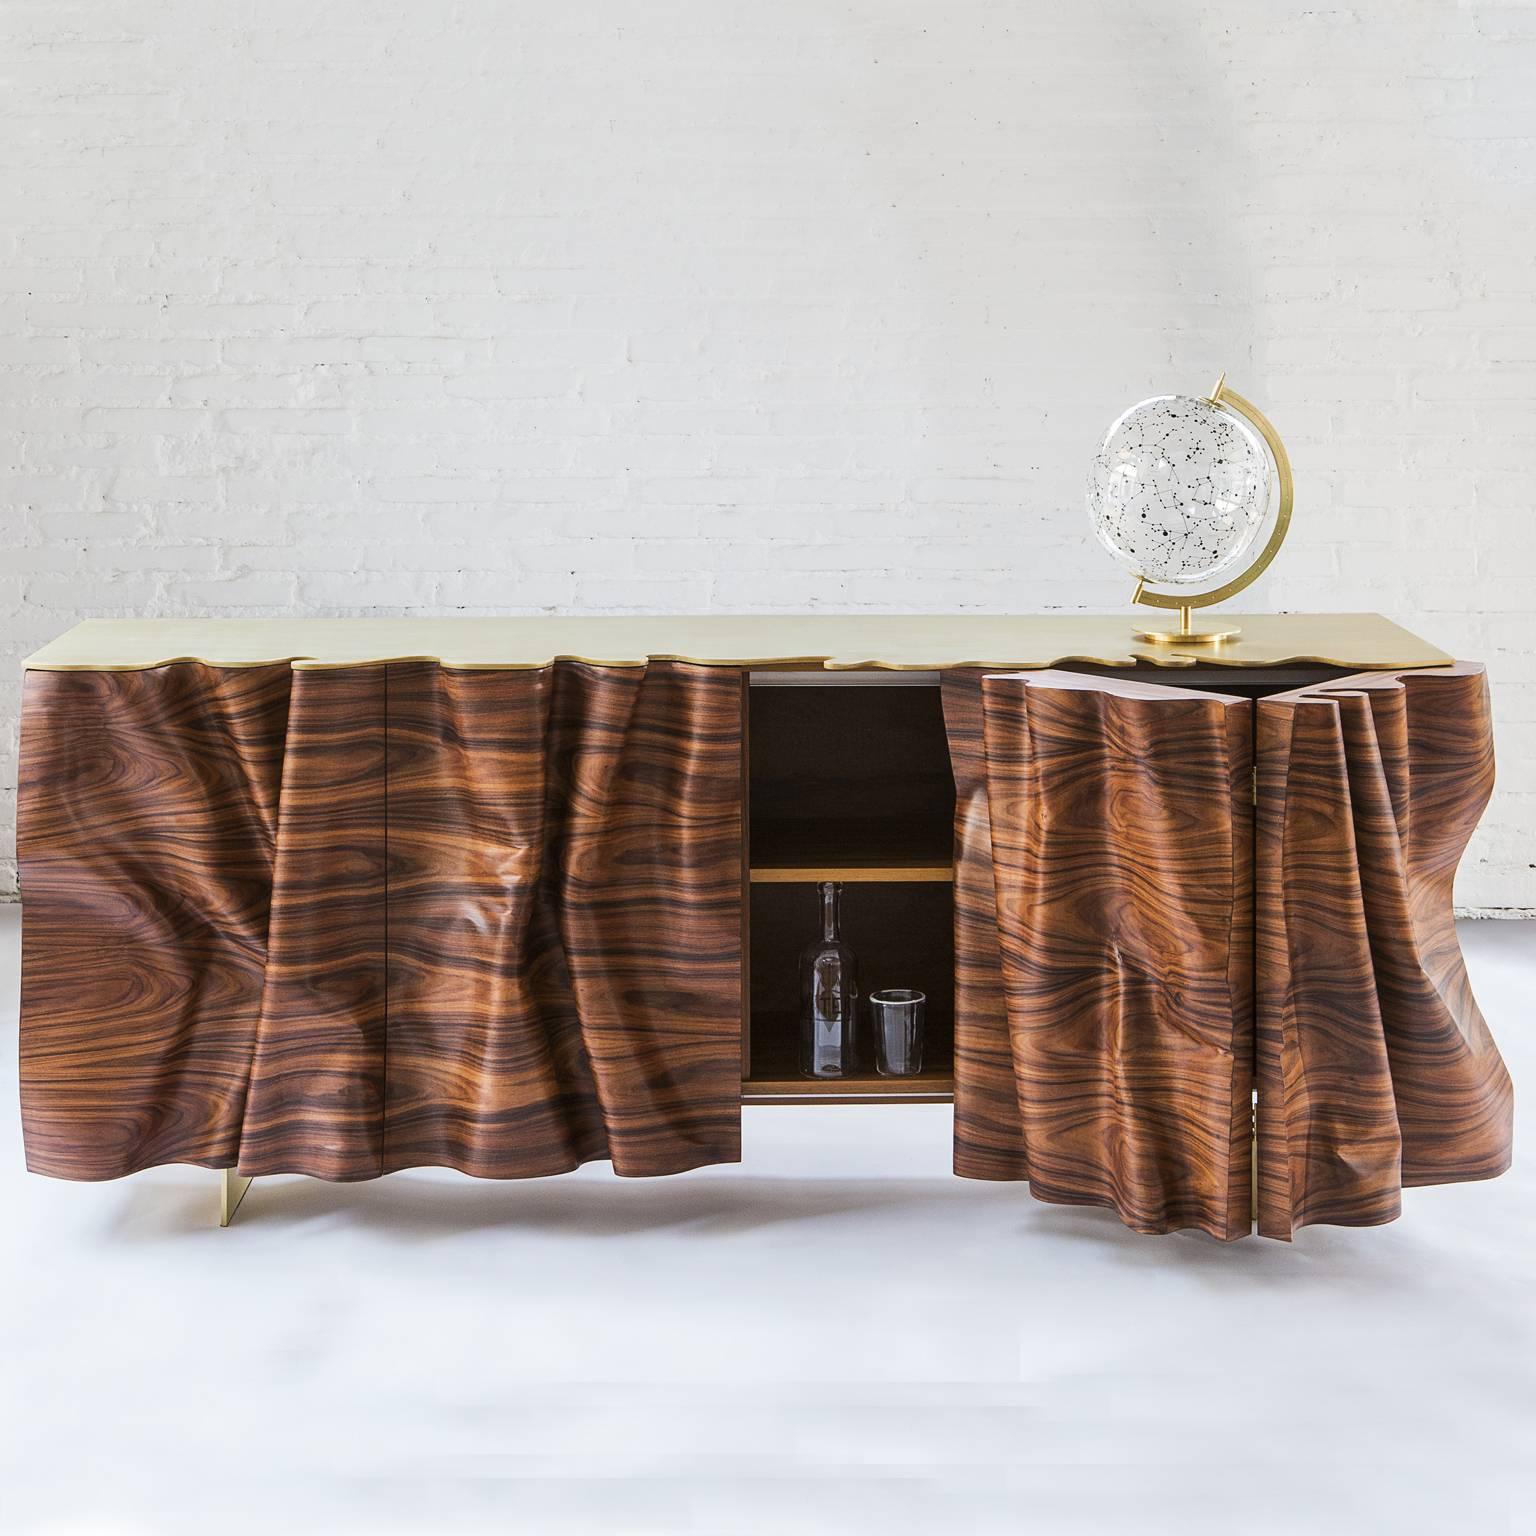 The buffet is the first item of the collection Una (Articolo Indeterminativo) by the Italian woodworker Stefano Marolla.
The title refers to the indeterminate article in the Italian grammar, as these pieces trick the eye playing on the ambiguity of